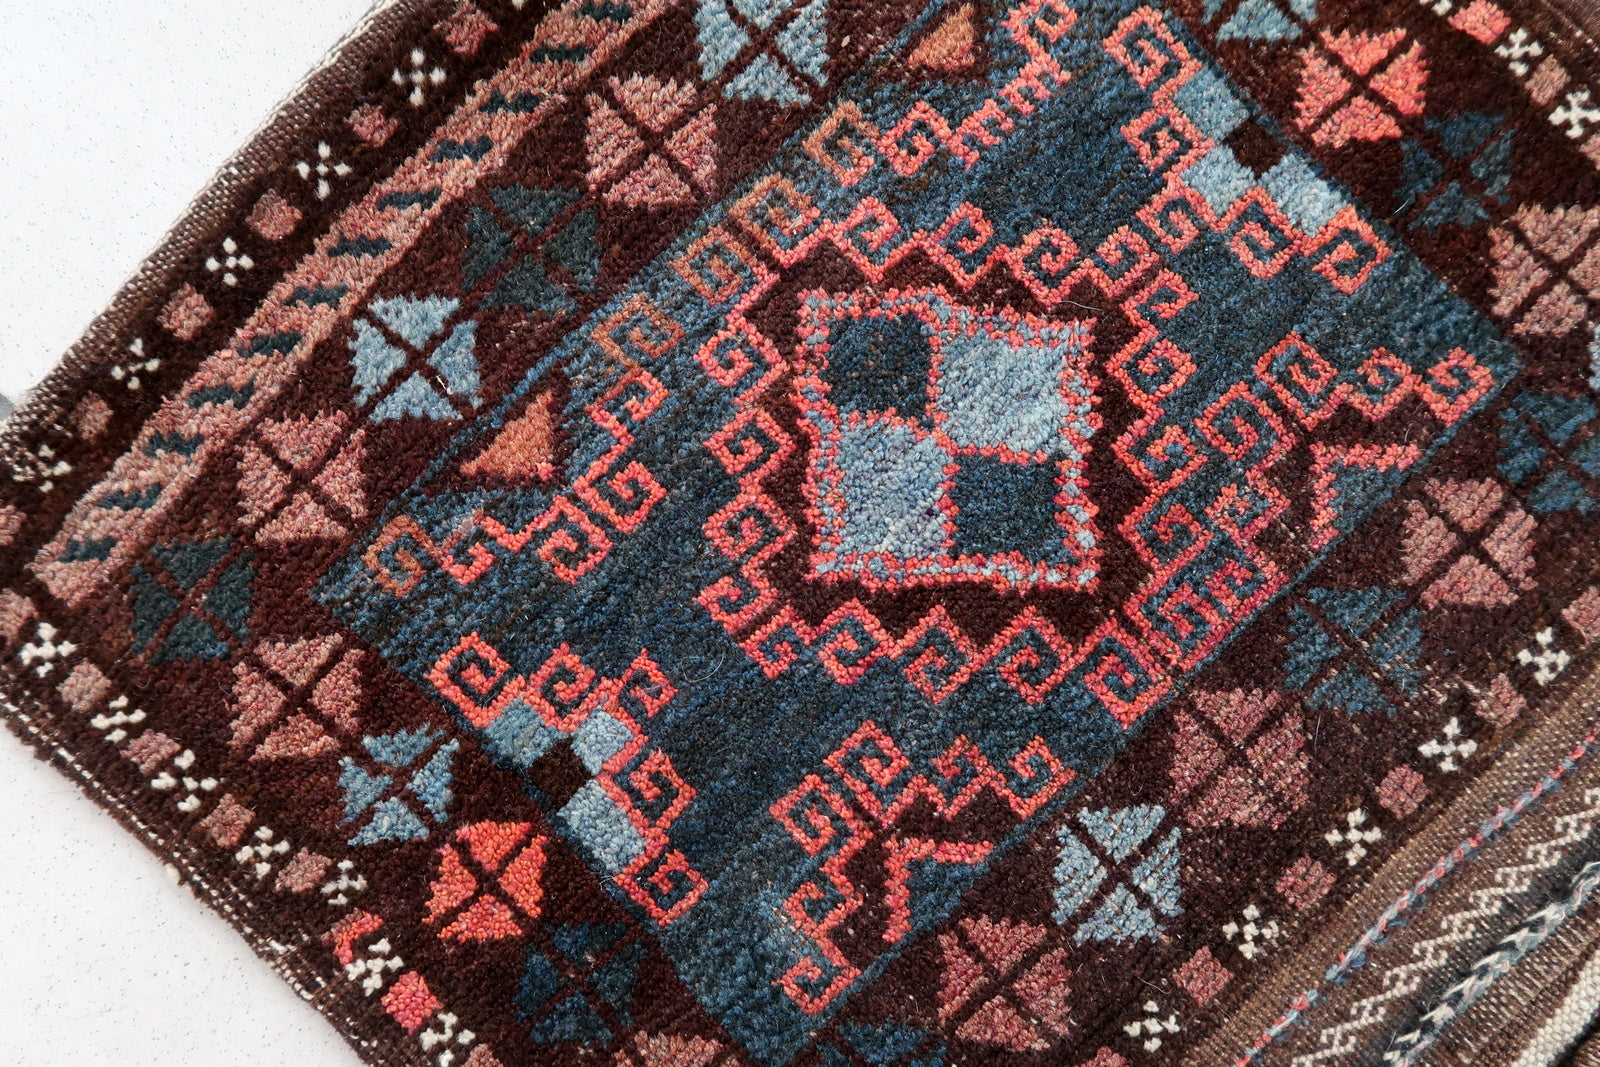 Handmade collectible antique Afghan Baluch saddle bag 1900s